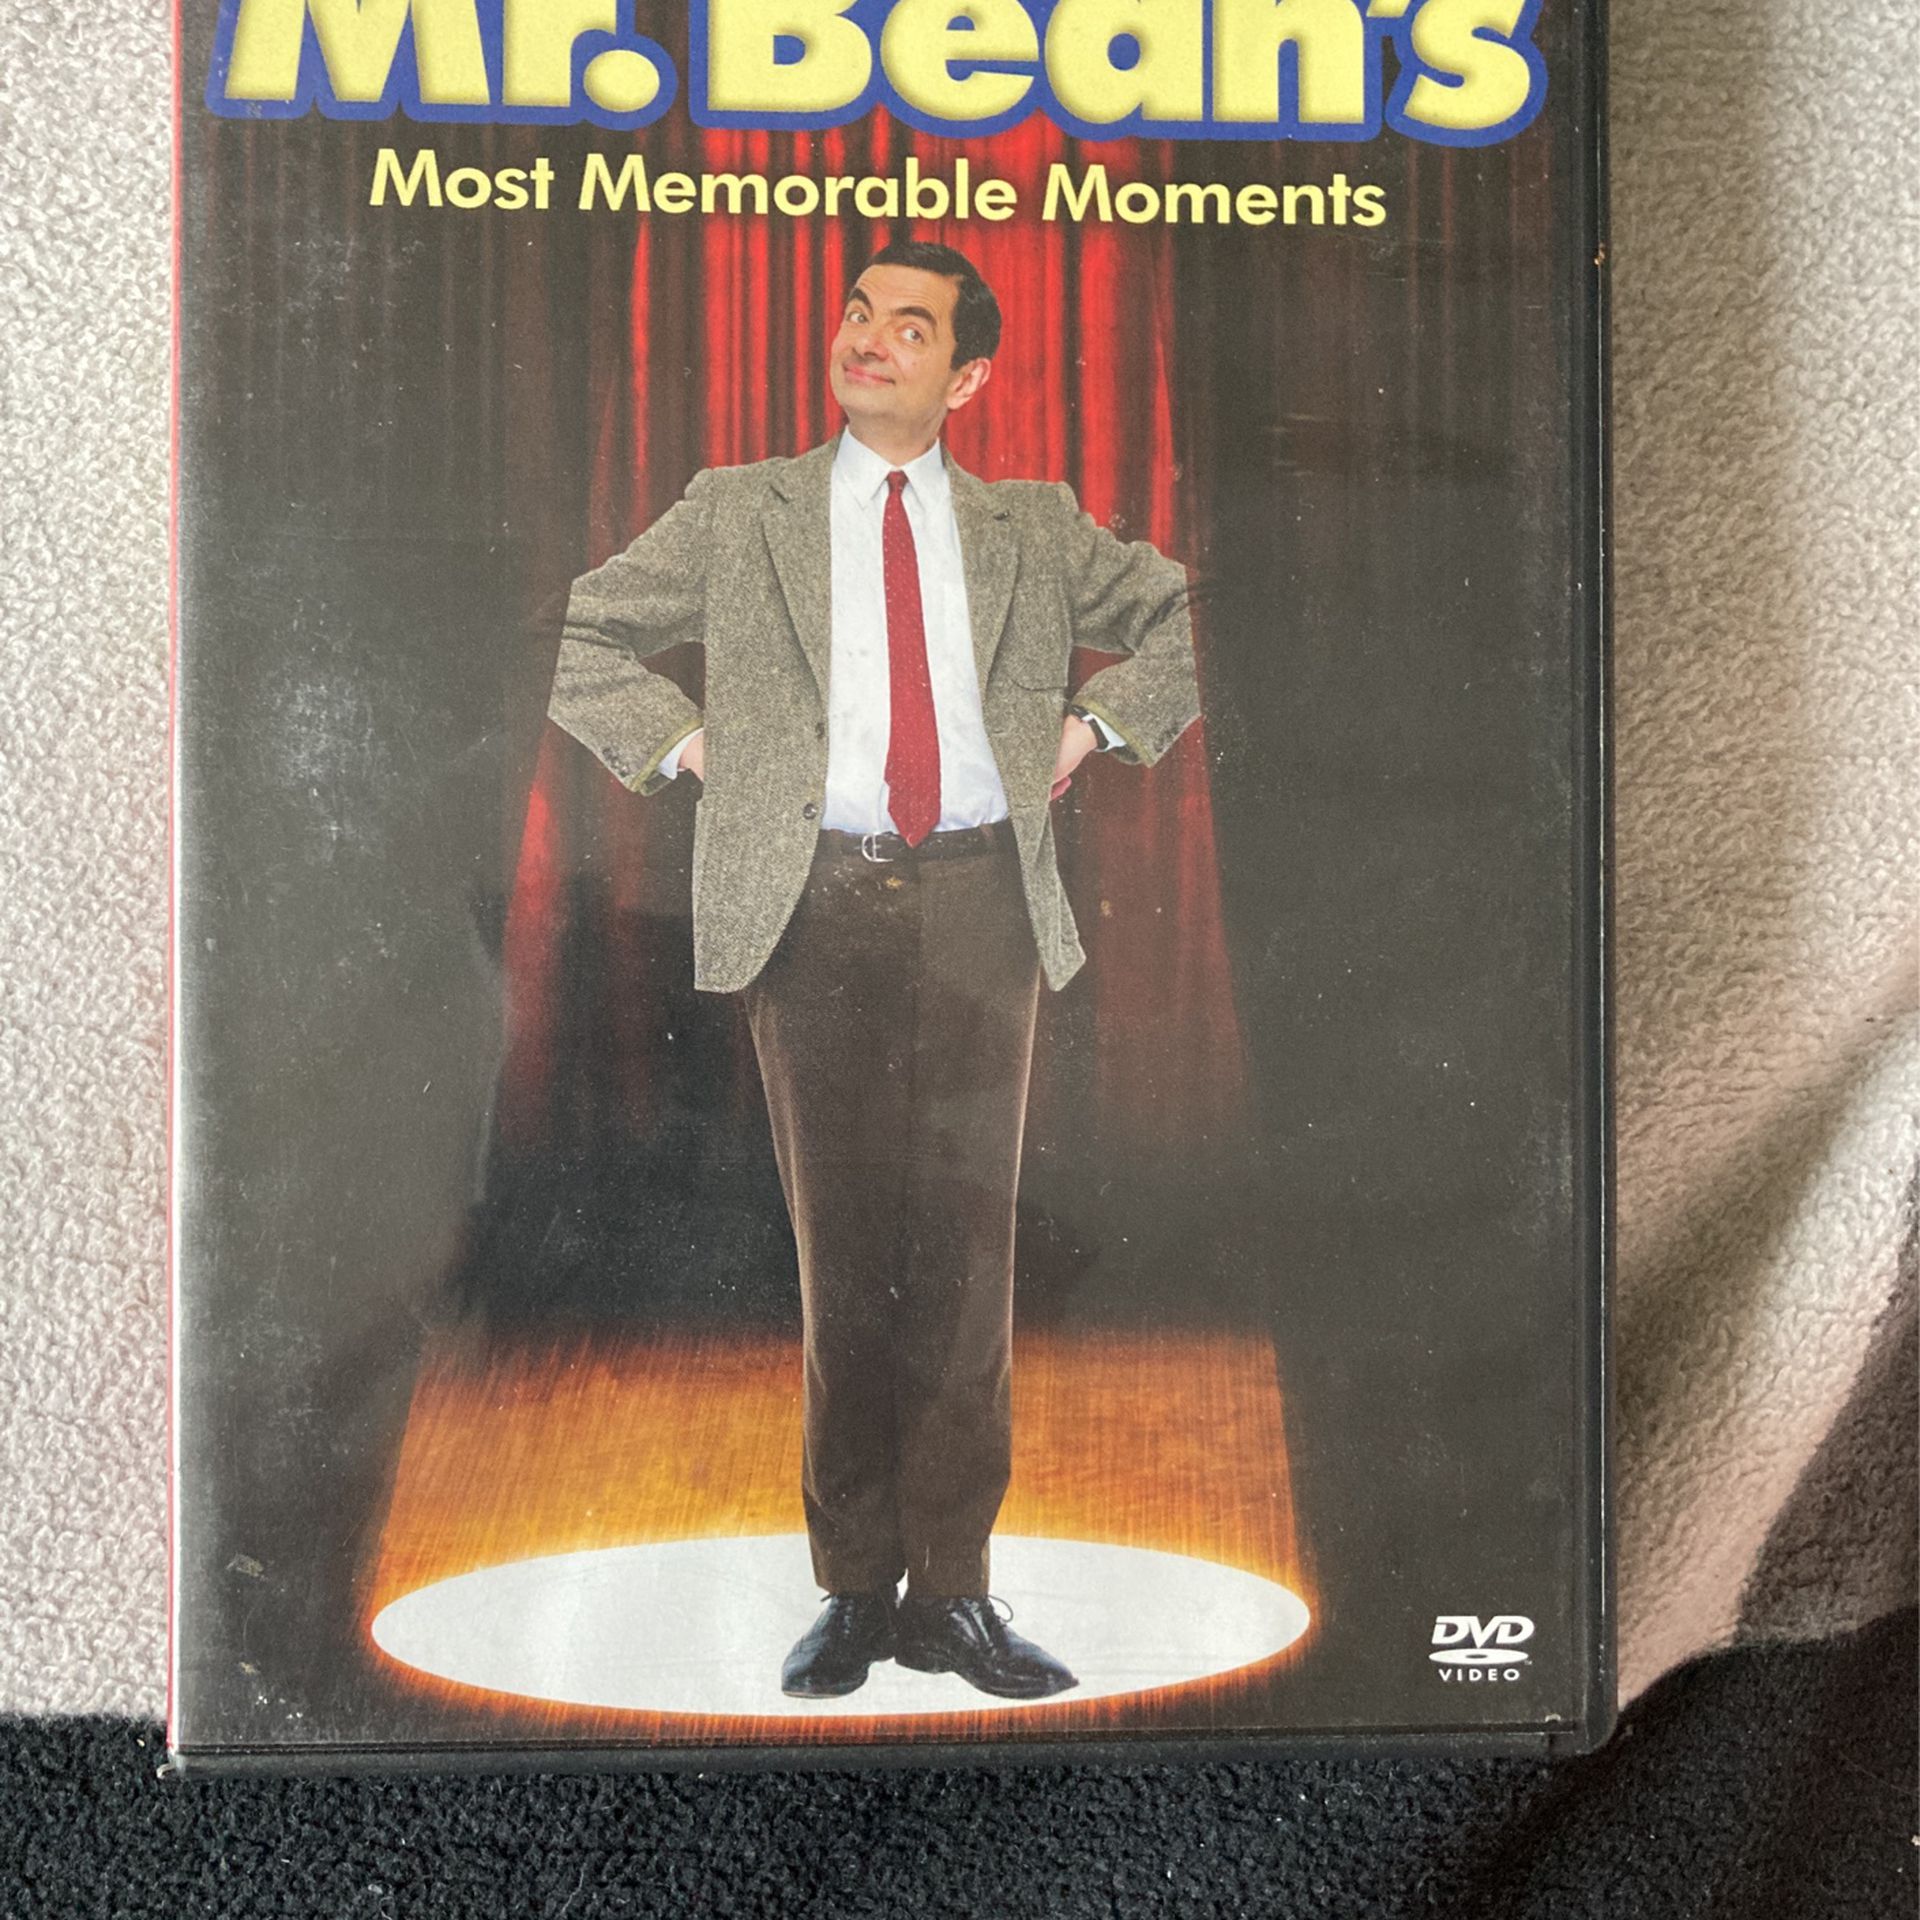 Mr. Bean’s Most Memorable Moments DVD